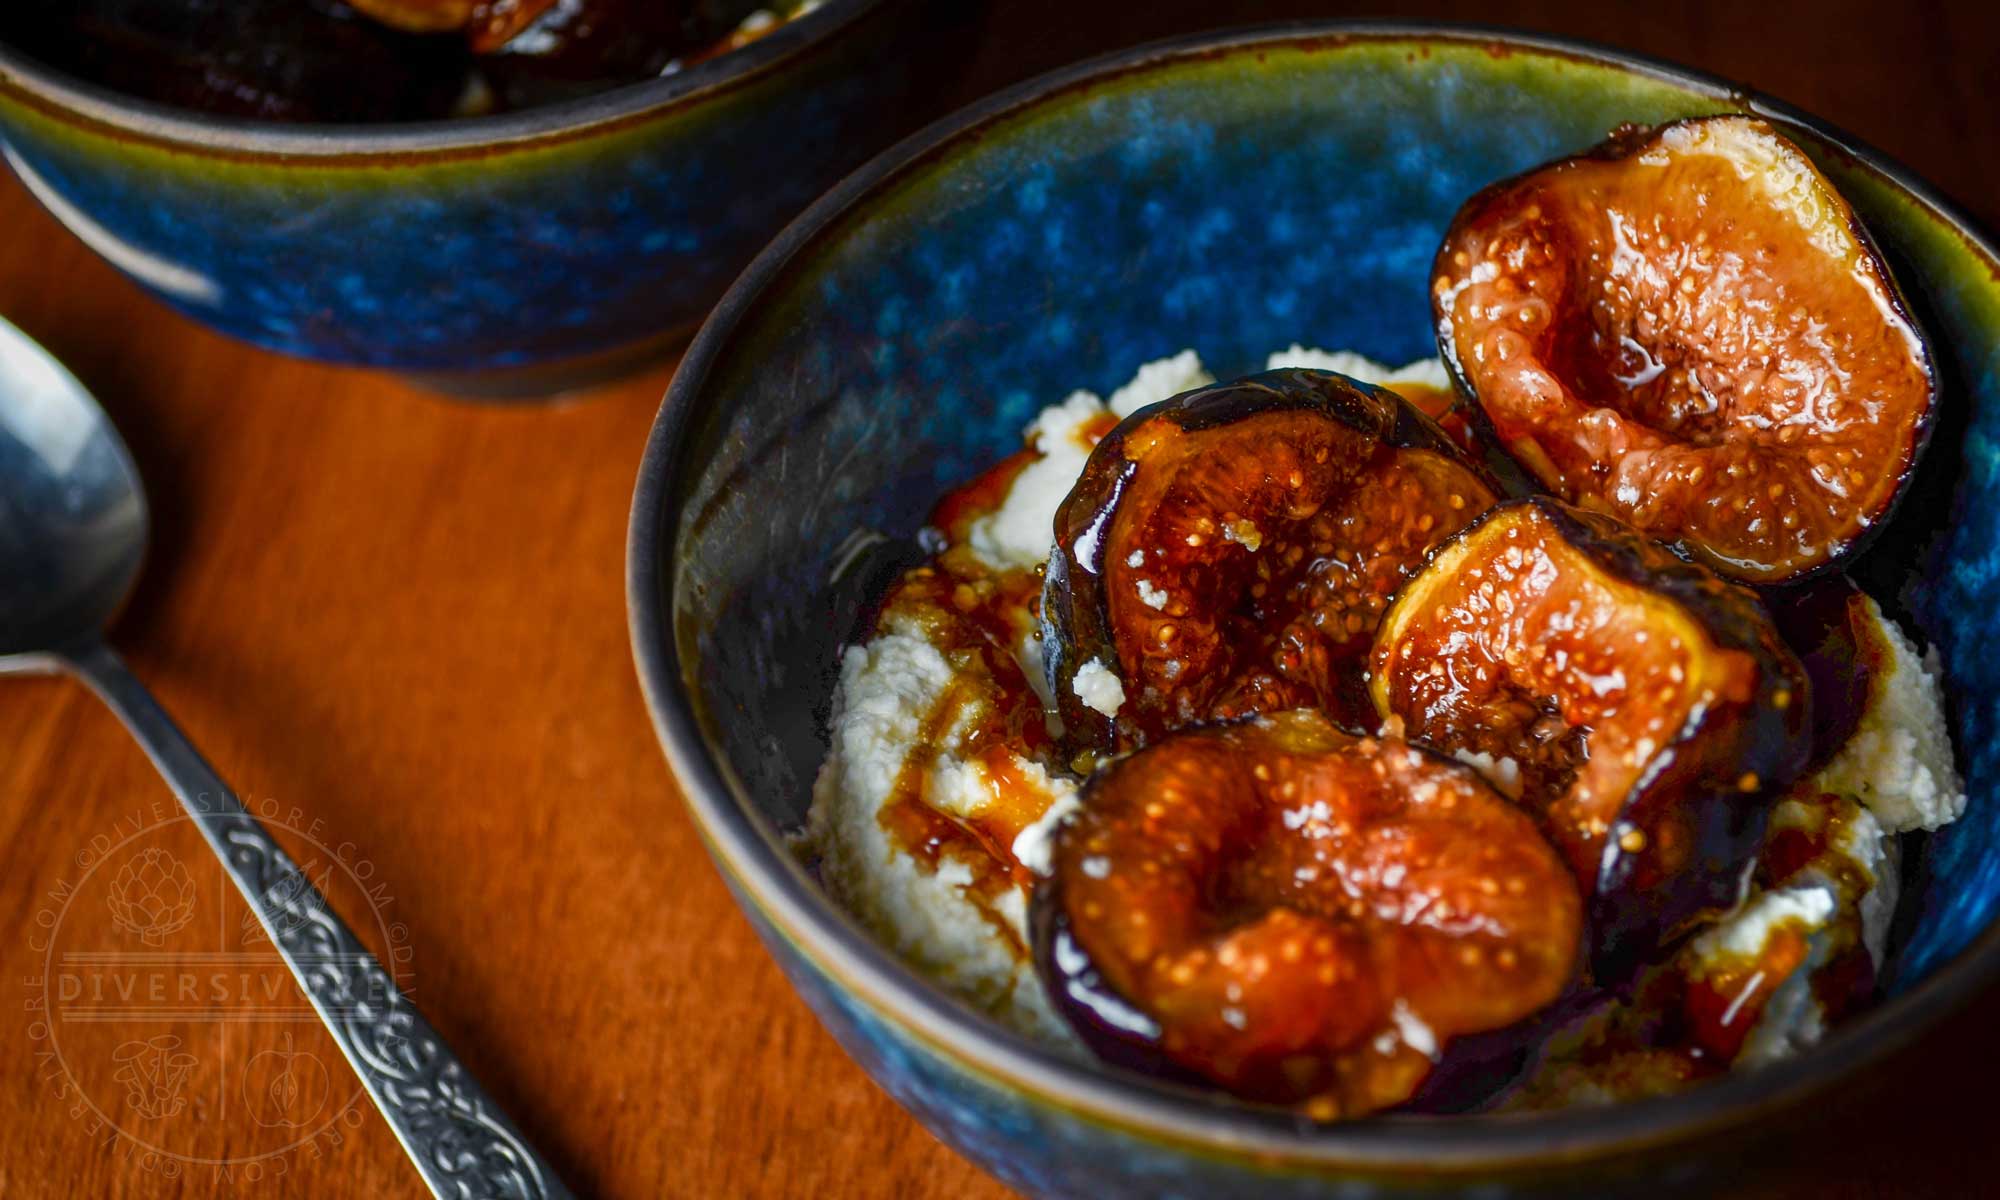 Ricotta and Figs with Whisky Caramel